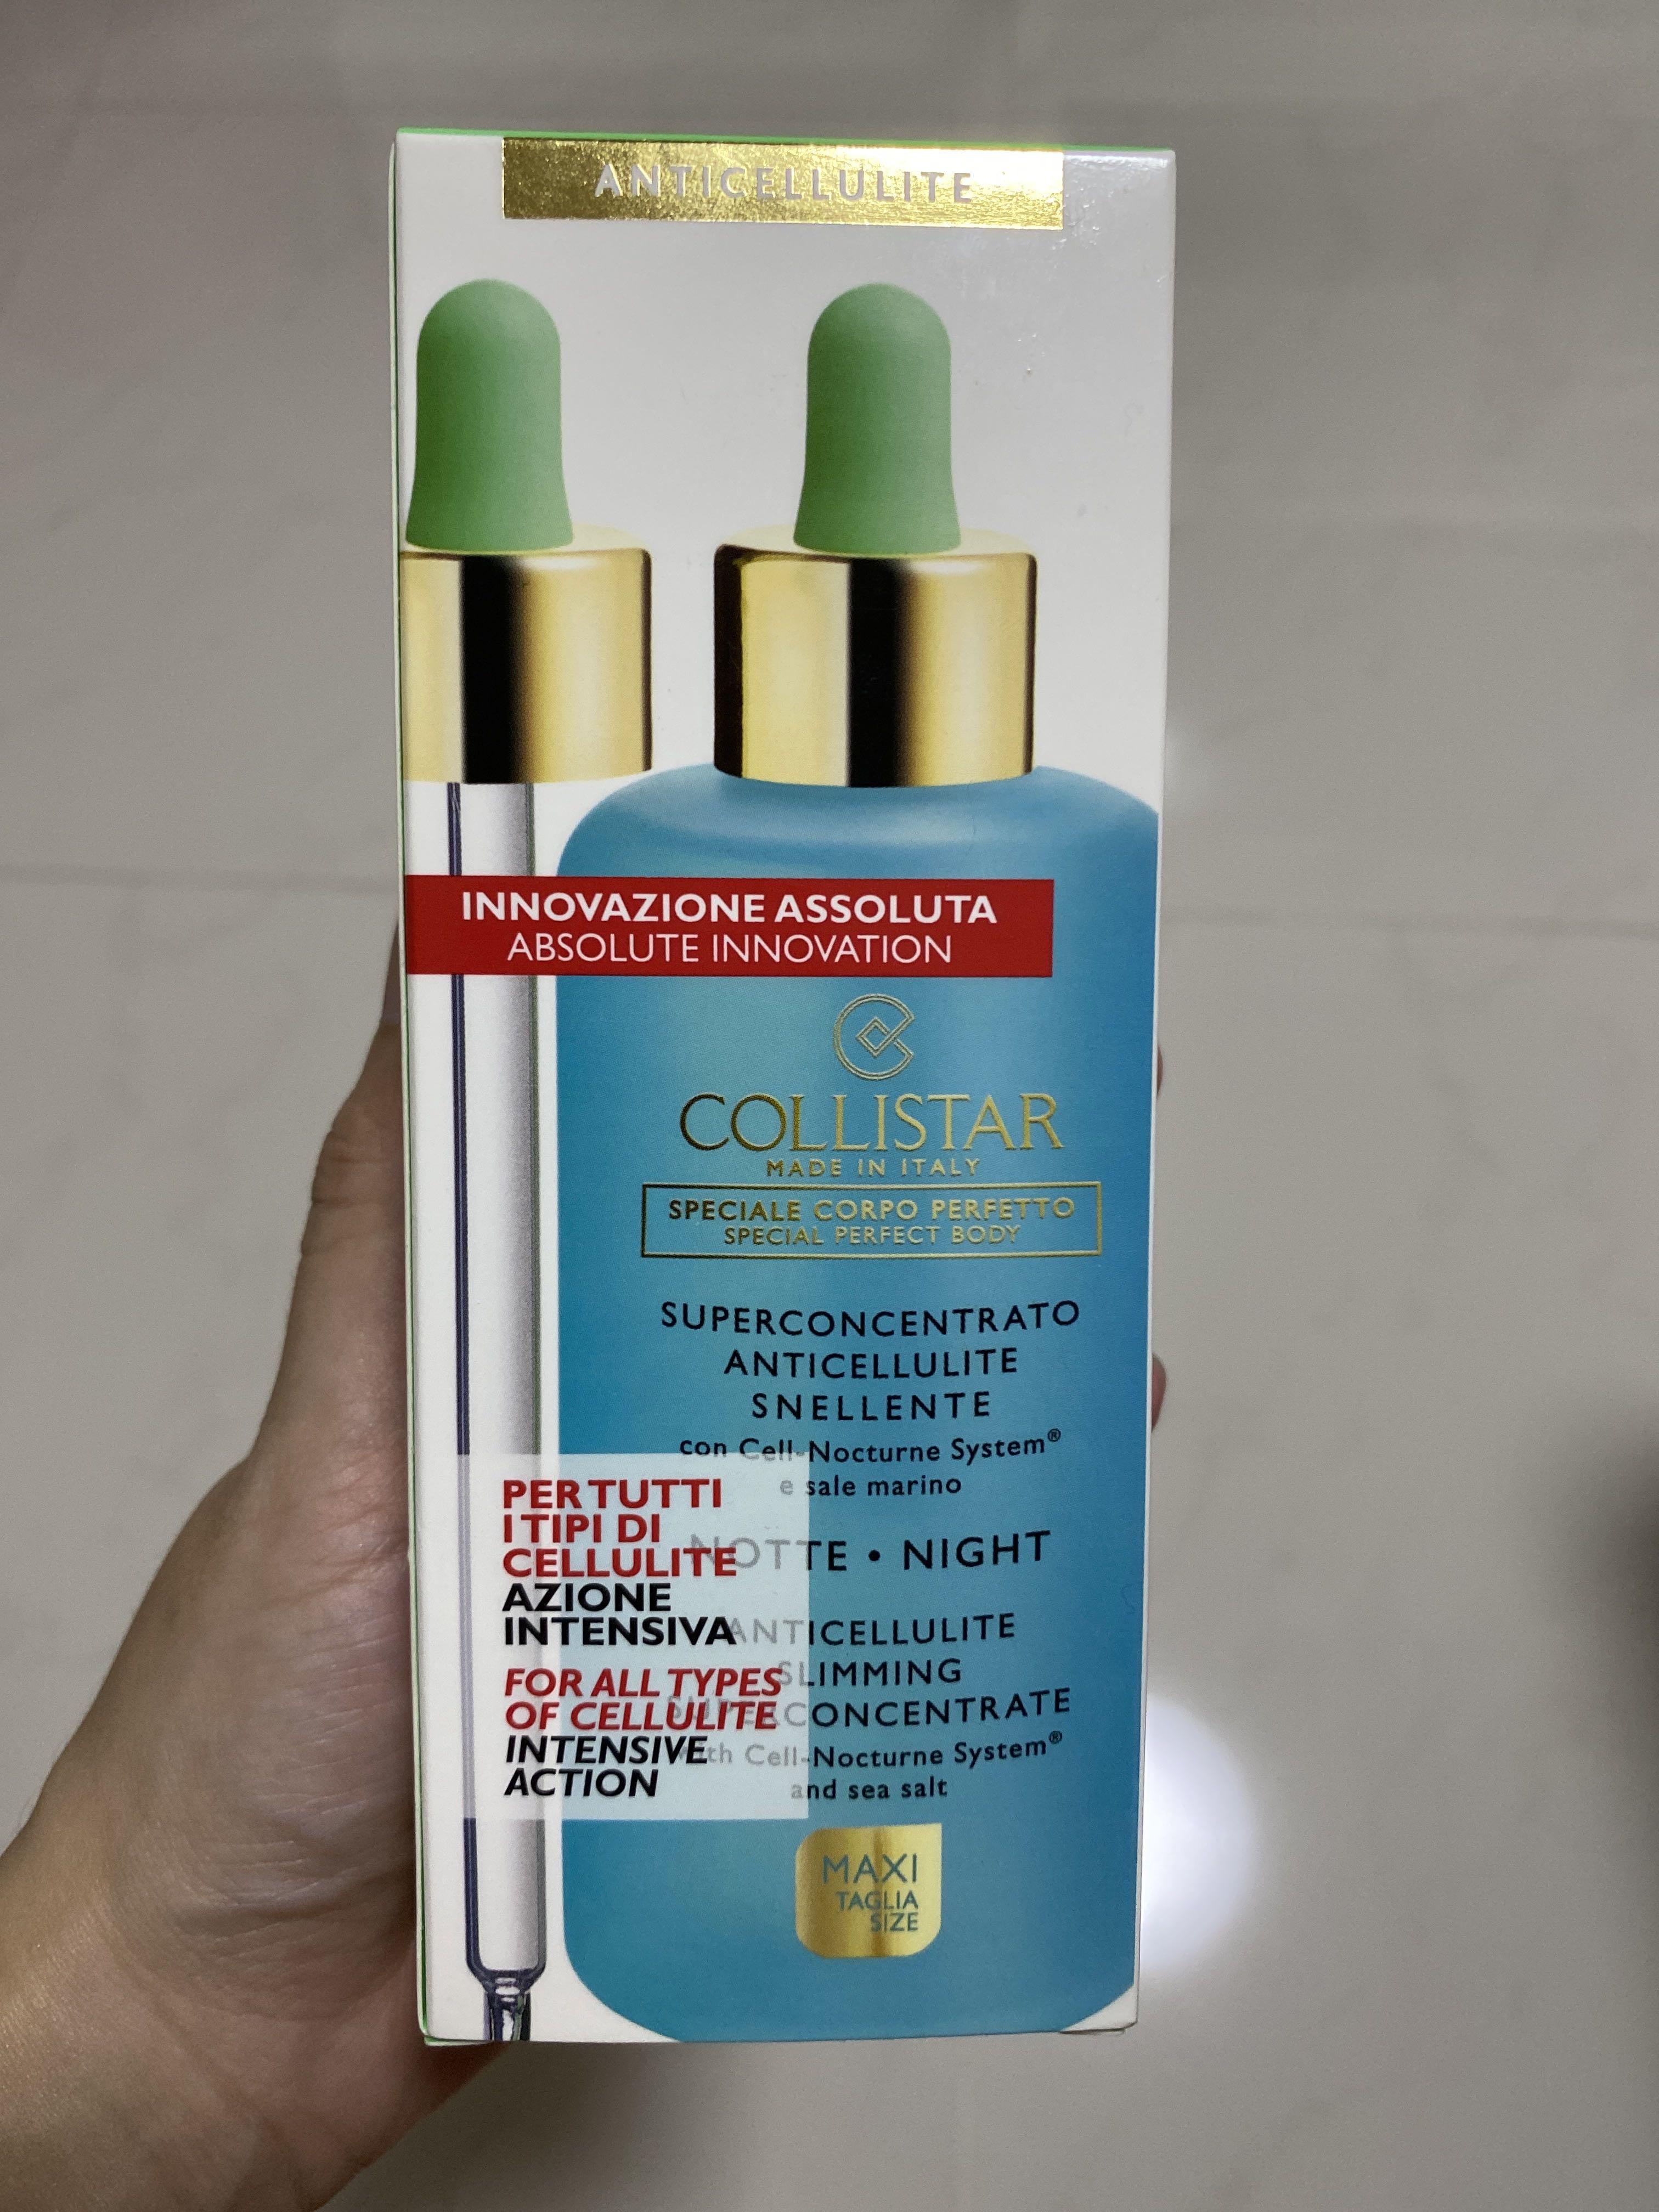 ANTICELLULITE* SLIMMING° SUPERCONCENTRATE NIGHT by Collistar